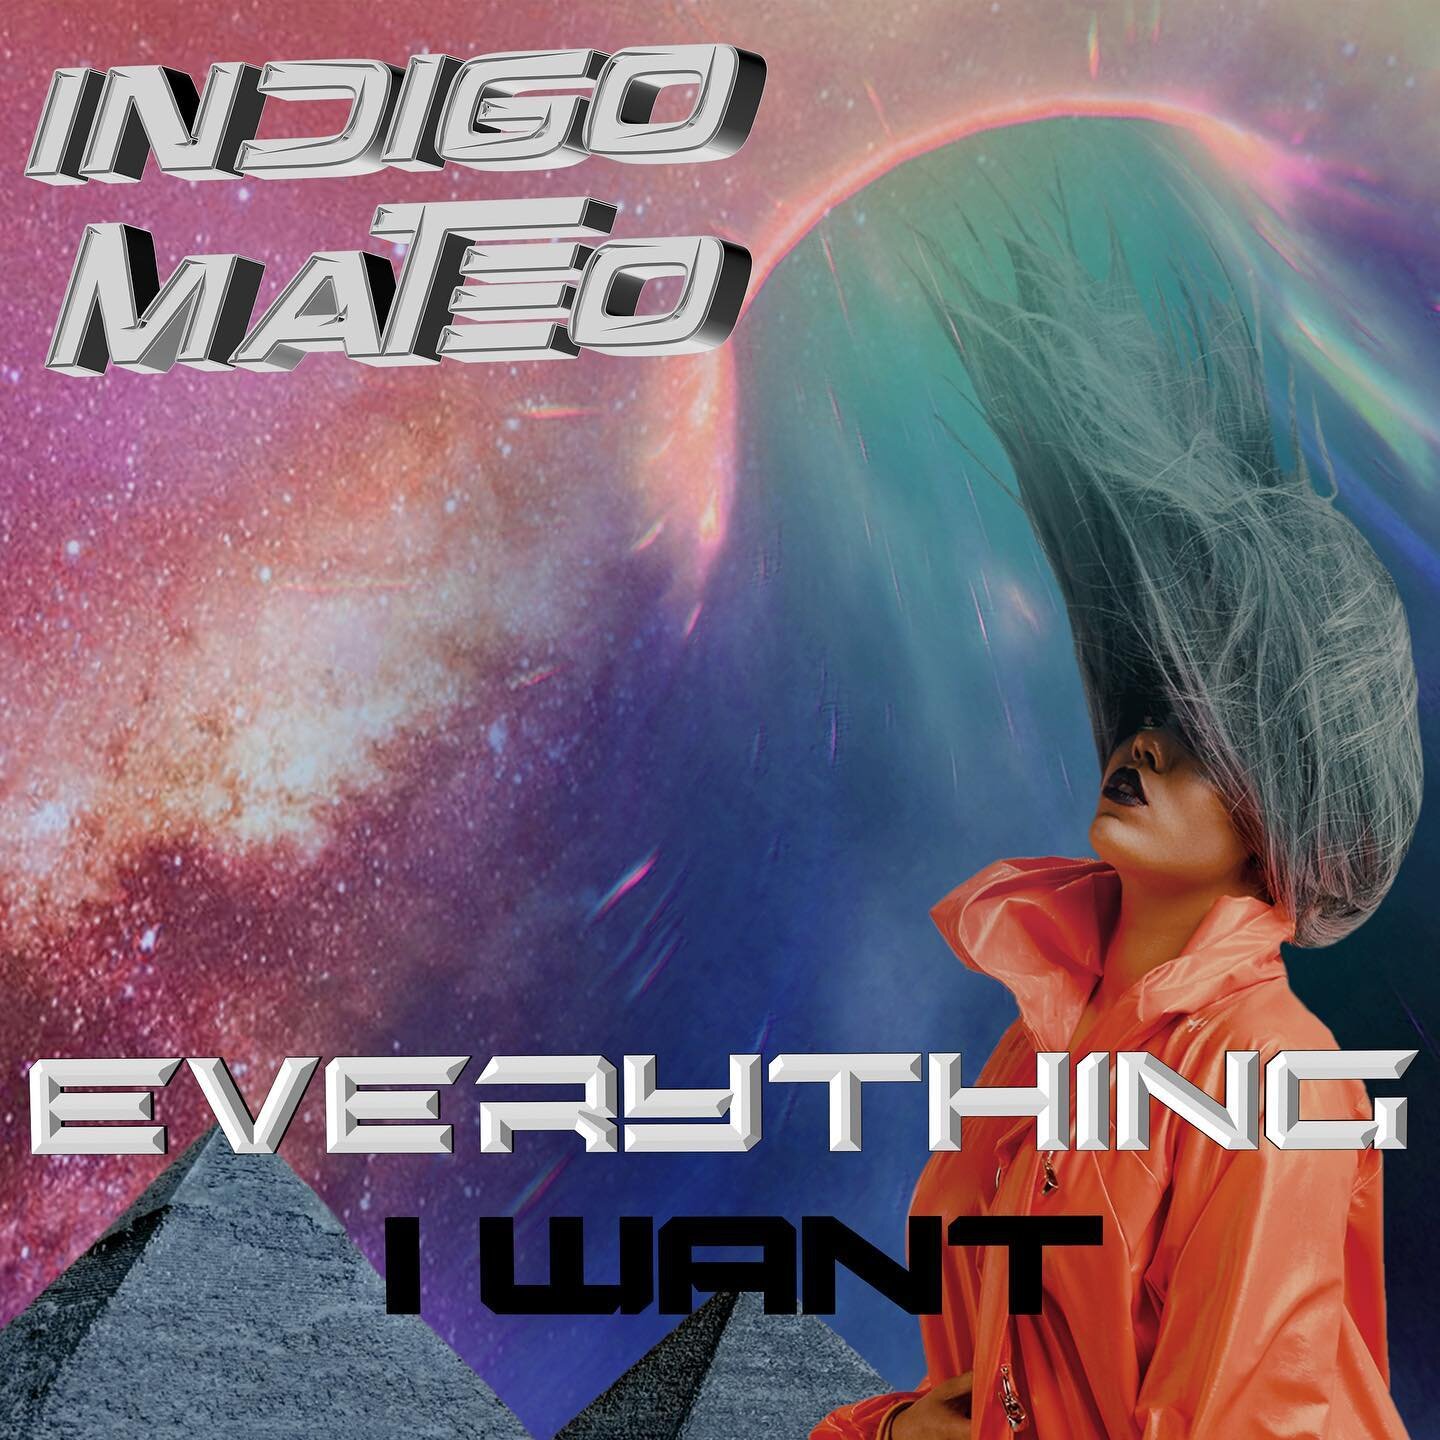 album cover with woman with teal hair flipping over her head and the words Indigo Mateo in the upper right corner